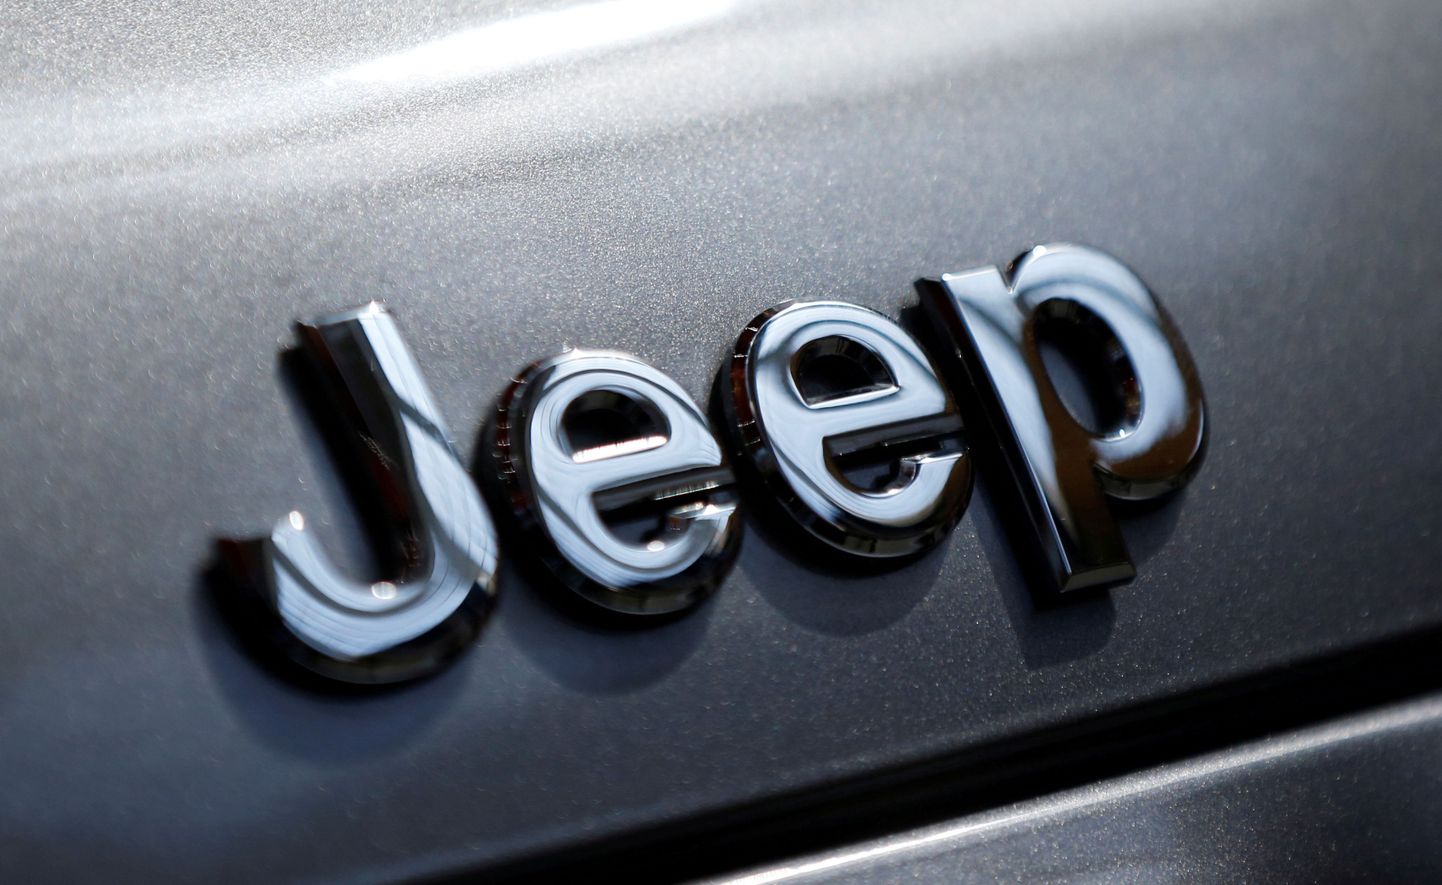 The logo of Fiat Chrysler Automobiles' (FCA) Jeep brand is seen on a vehicle at Tbilisi Mall in Tbilisi, Georgia, April 22, 2016. REUTERS/David Mdzinarishvili/File Photo